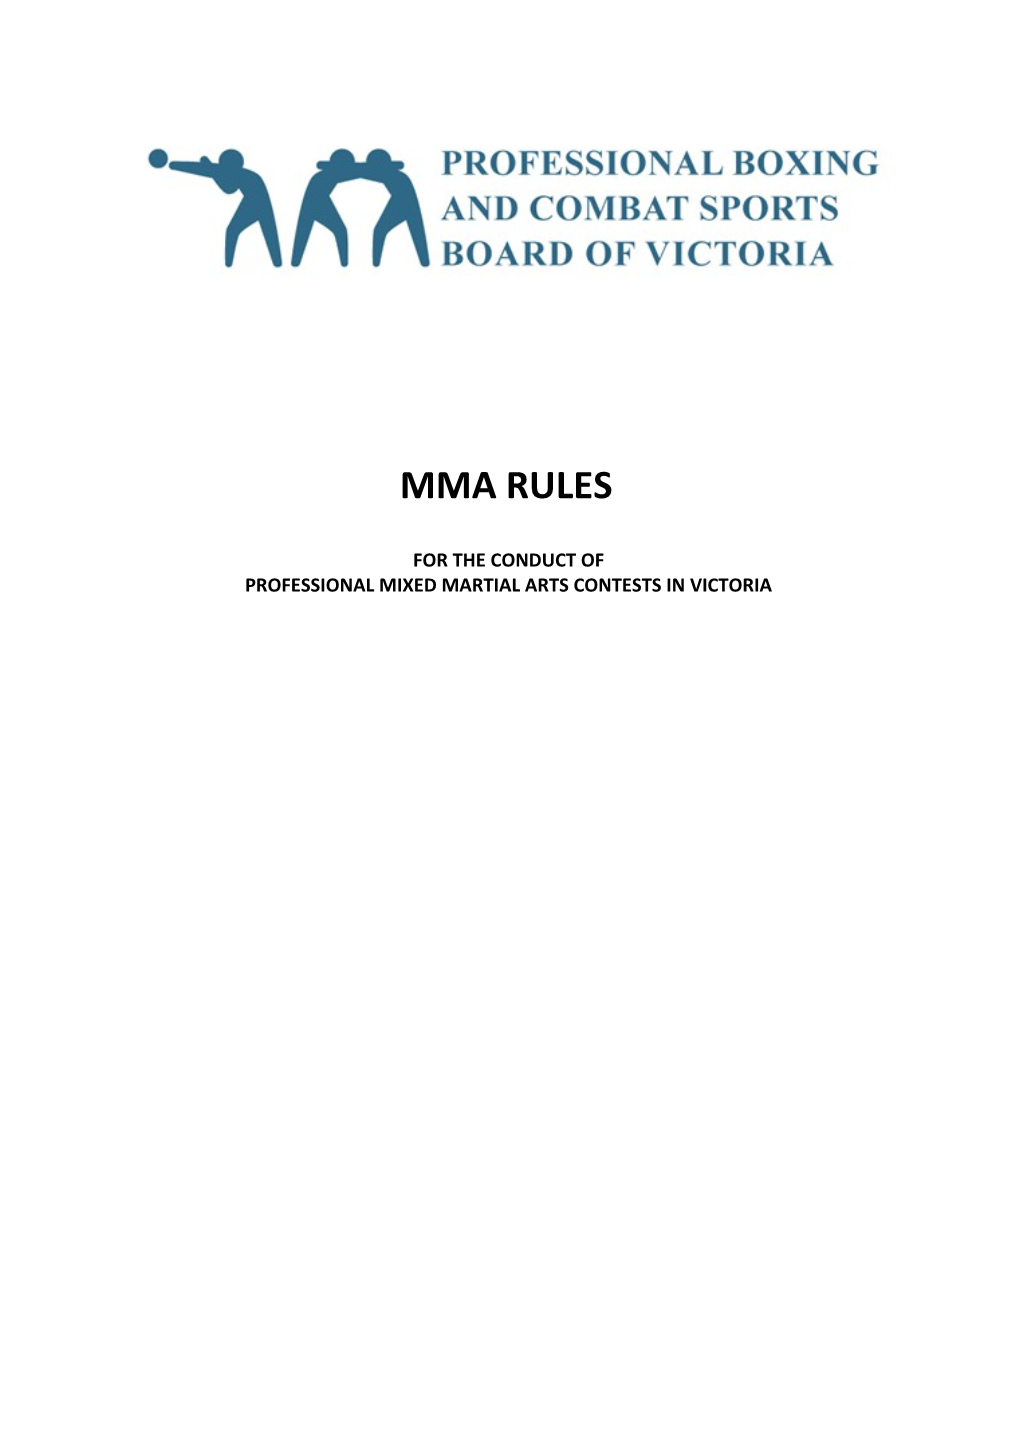 For the Conduct of Professional Mixed Martial Arts Contests in Victoria